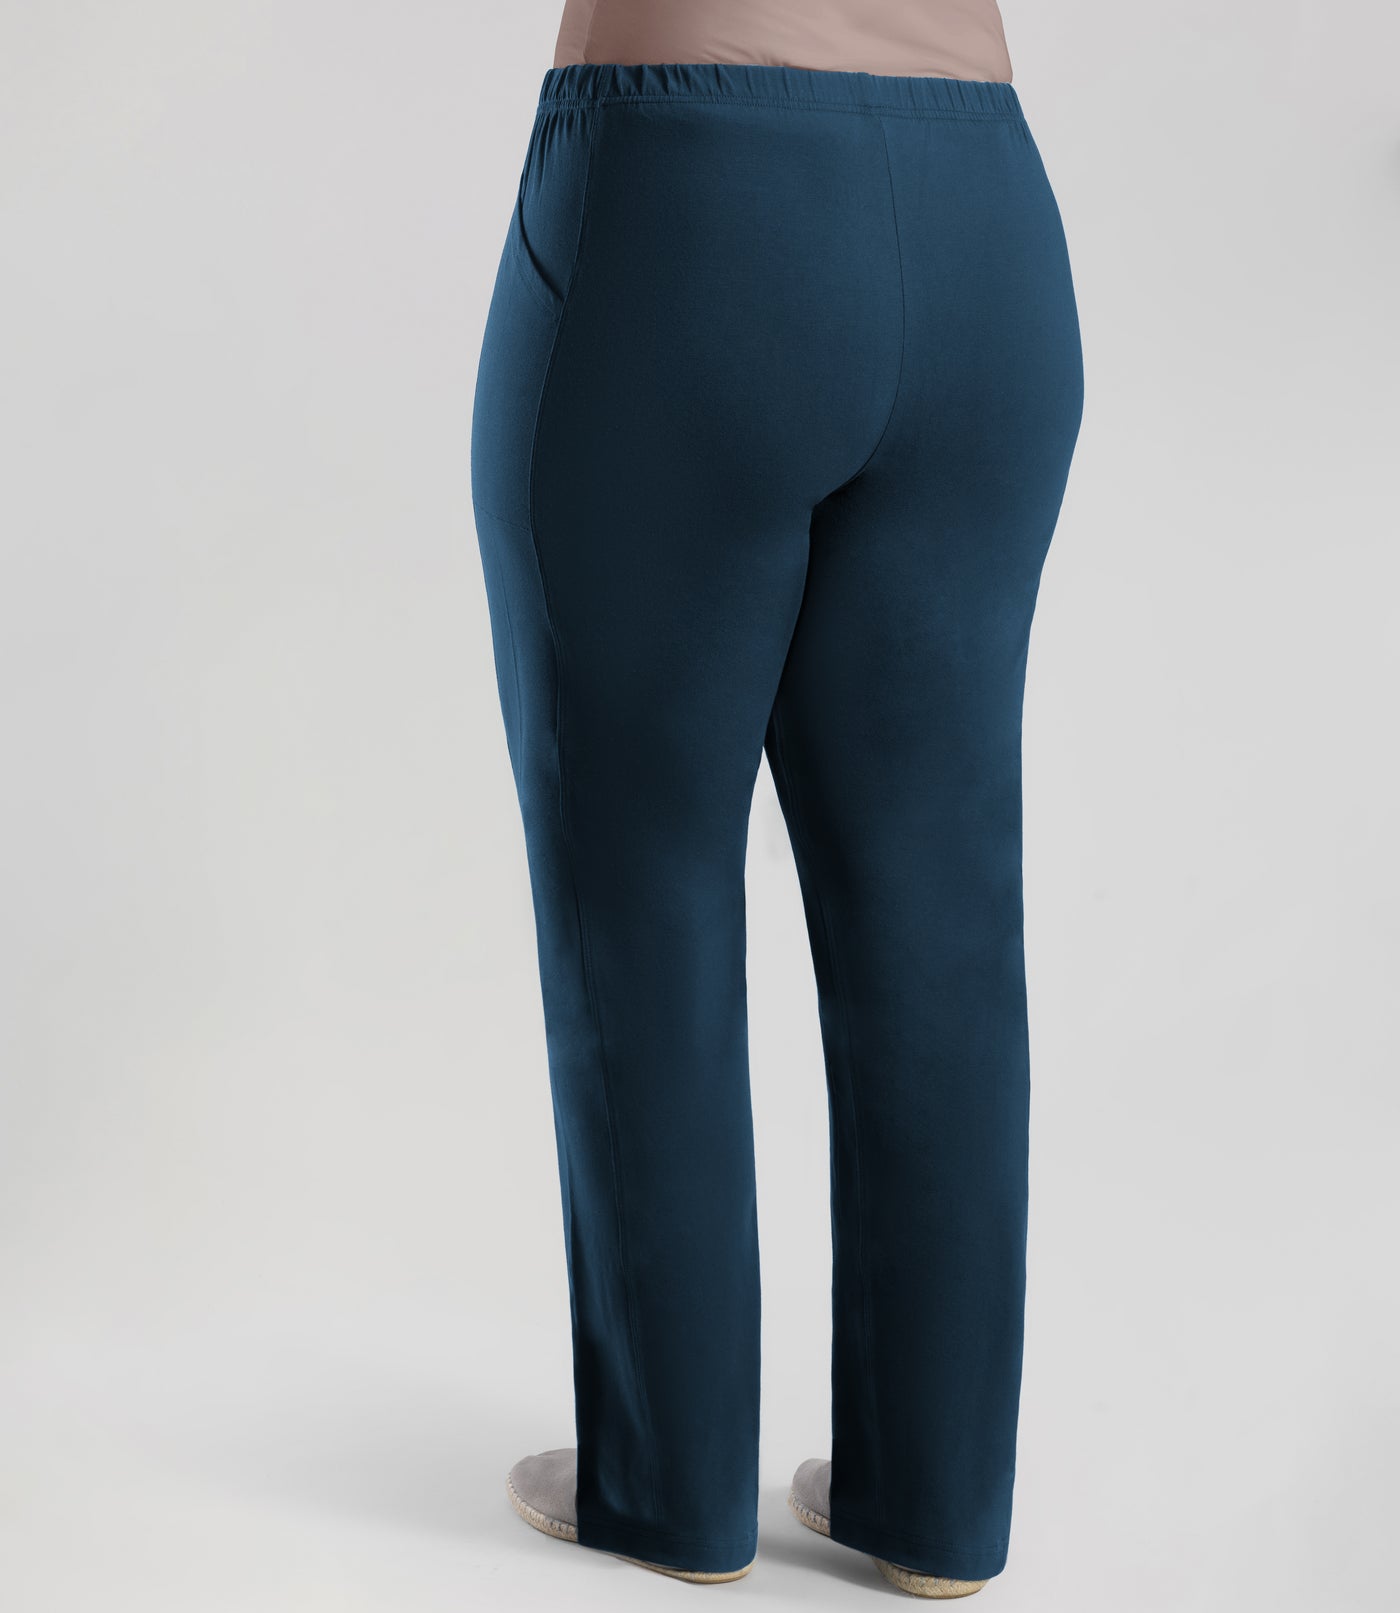 Back view, bottom half of plus sized woman, wearing JunoActive Stretch Naturals Side Pocket Loose Fit Leggings in color indigo. Bottom hem is at the ankle